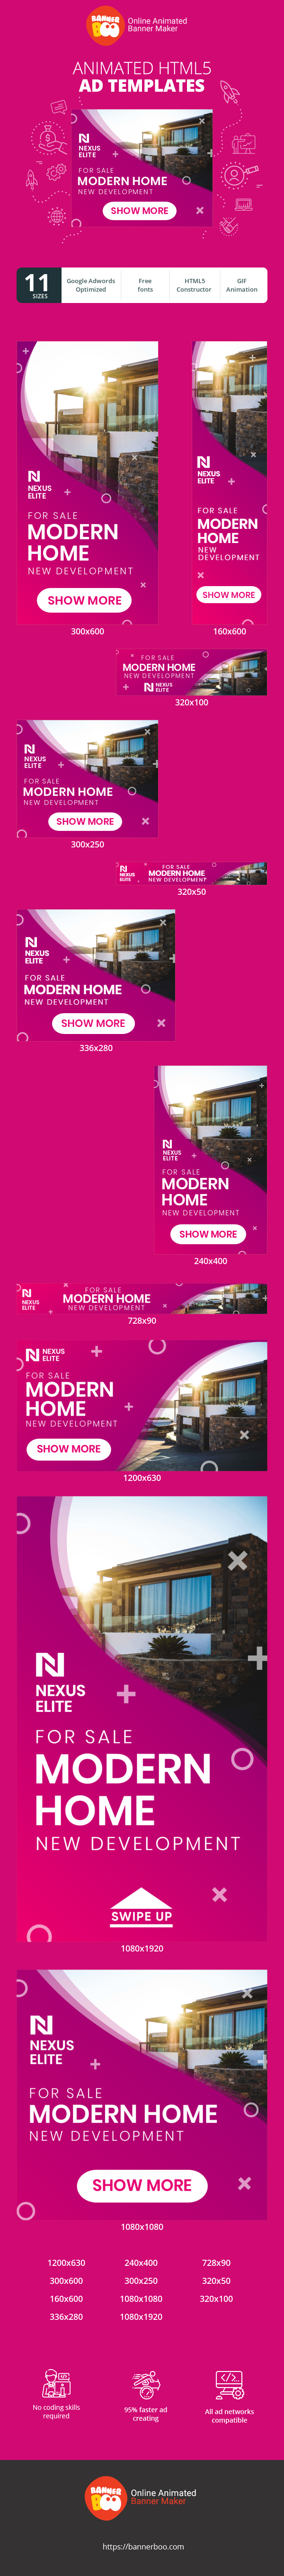 Banner ad template — Modern Home — For Sale New Development